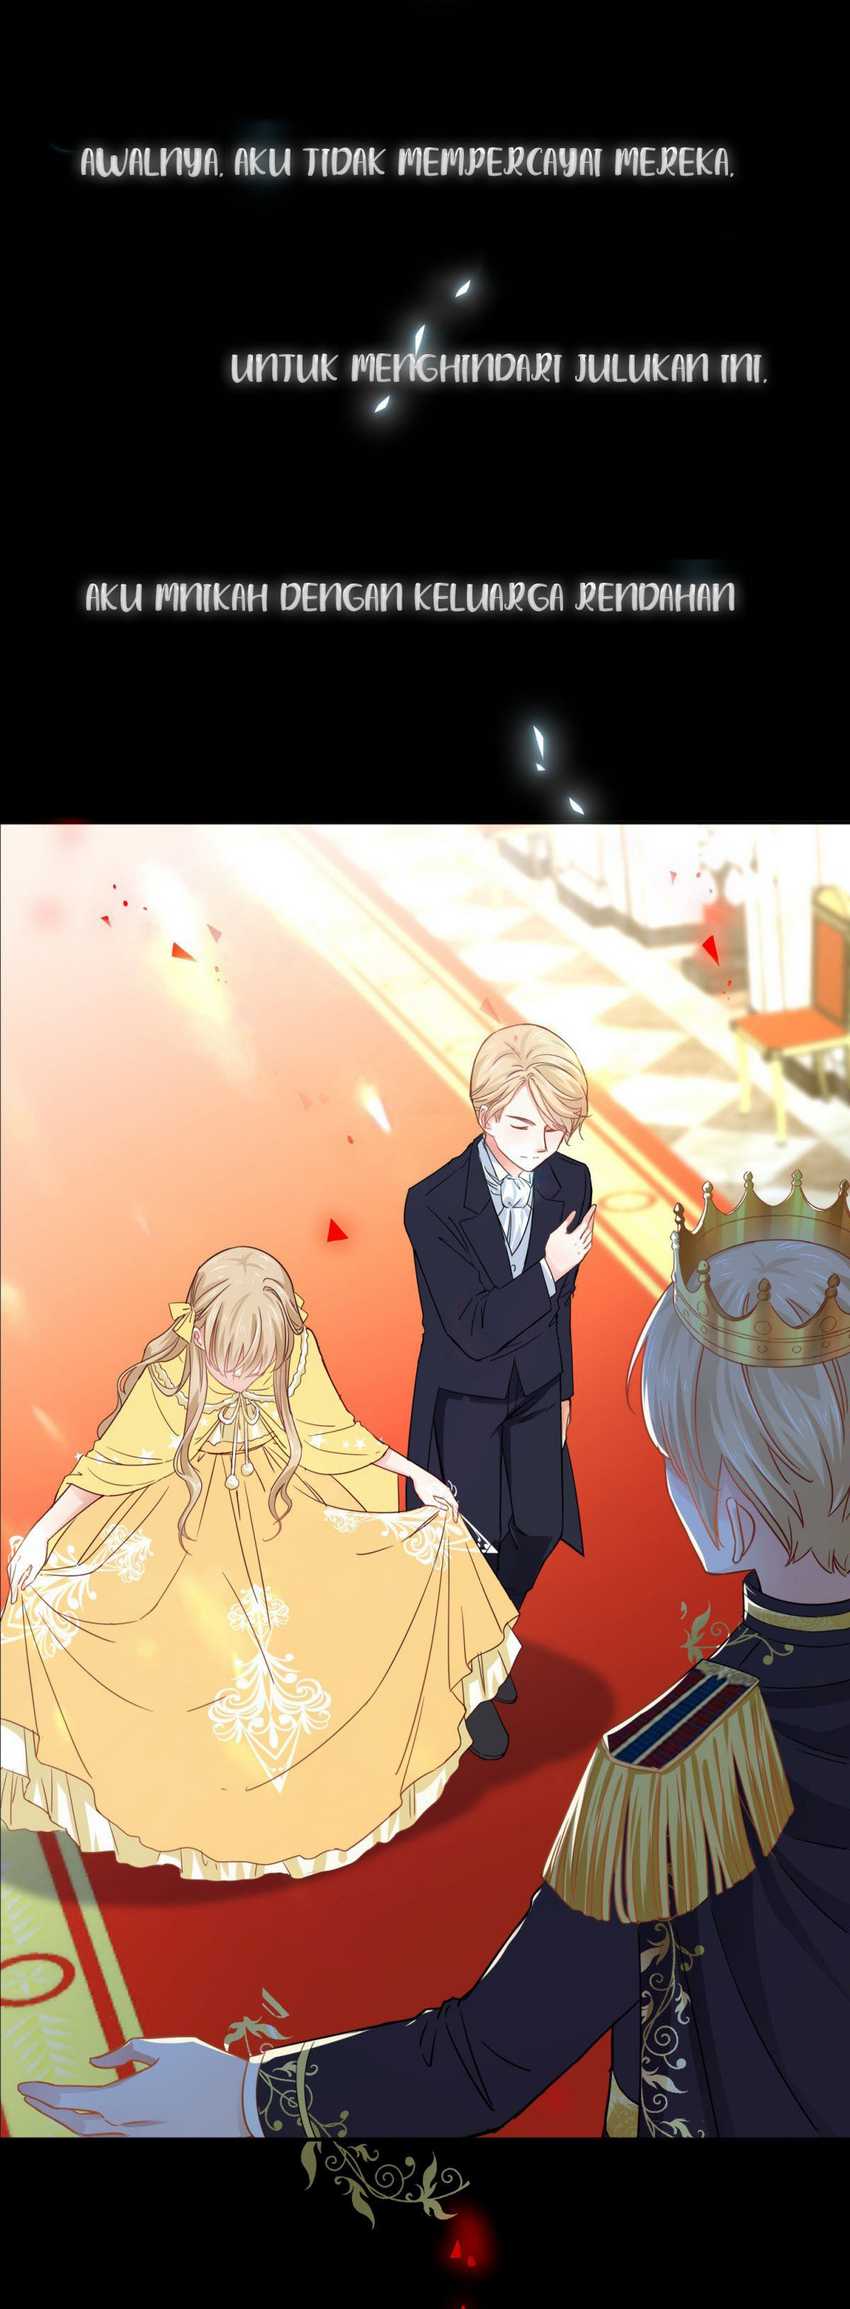 The King’s Beloved Daughter Chapter 0